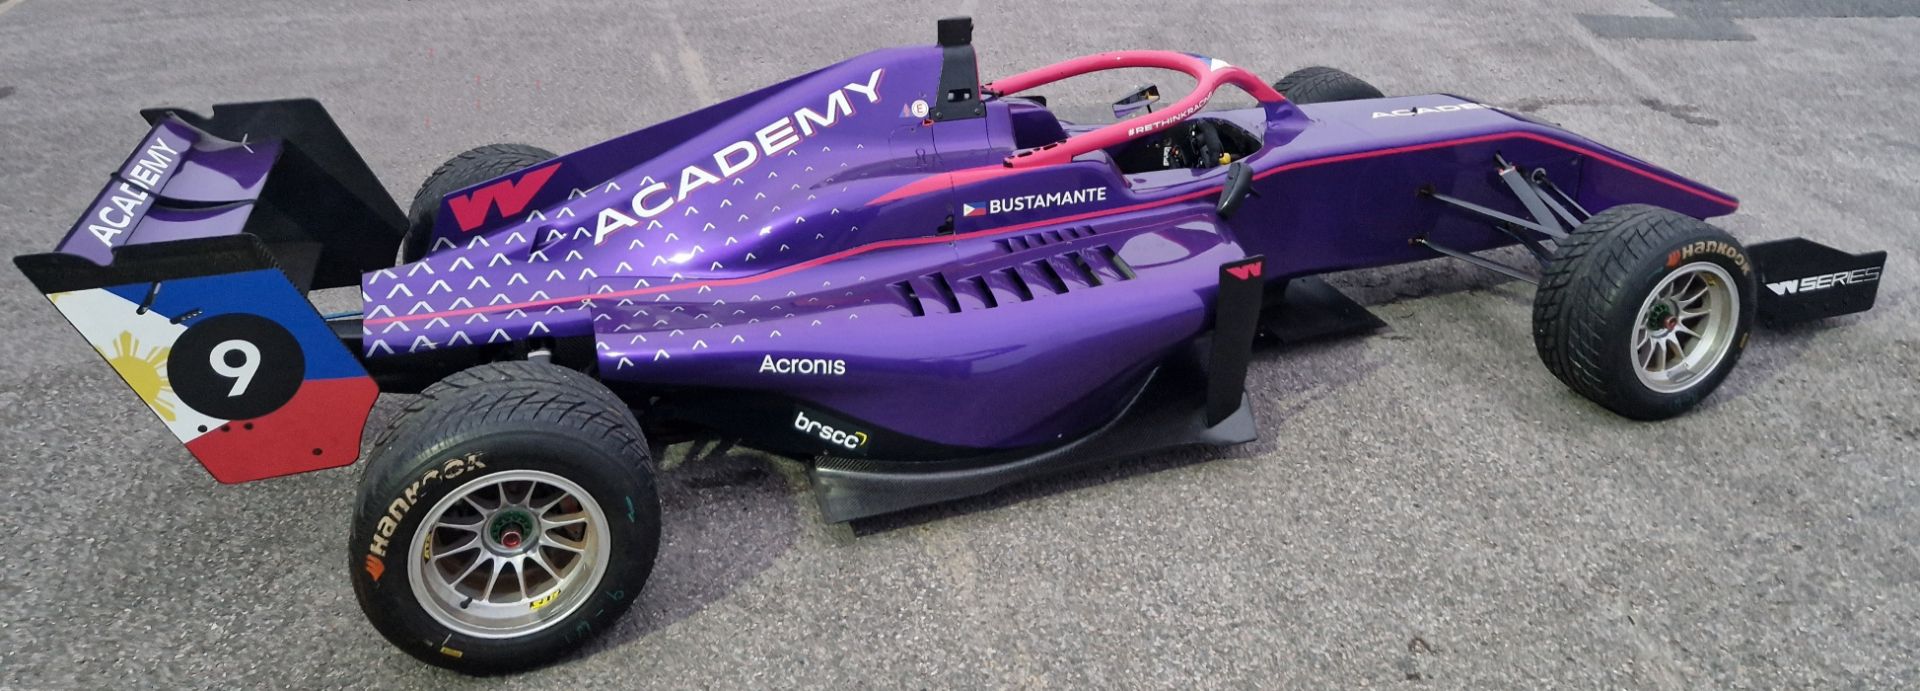 One TATUUS F3 T-318 Alfa Romeo Race Car Chassis No. 057 (2019) Finished in the W Series Academy - Bild 2 aus 10